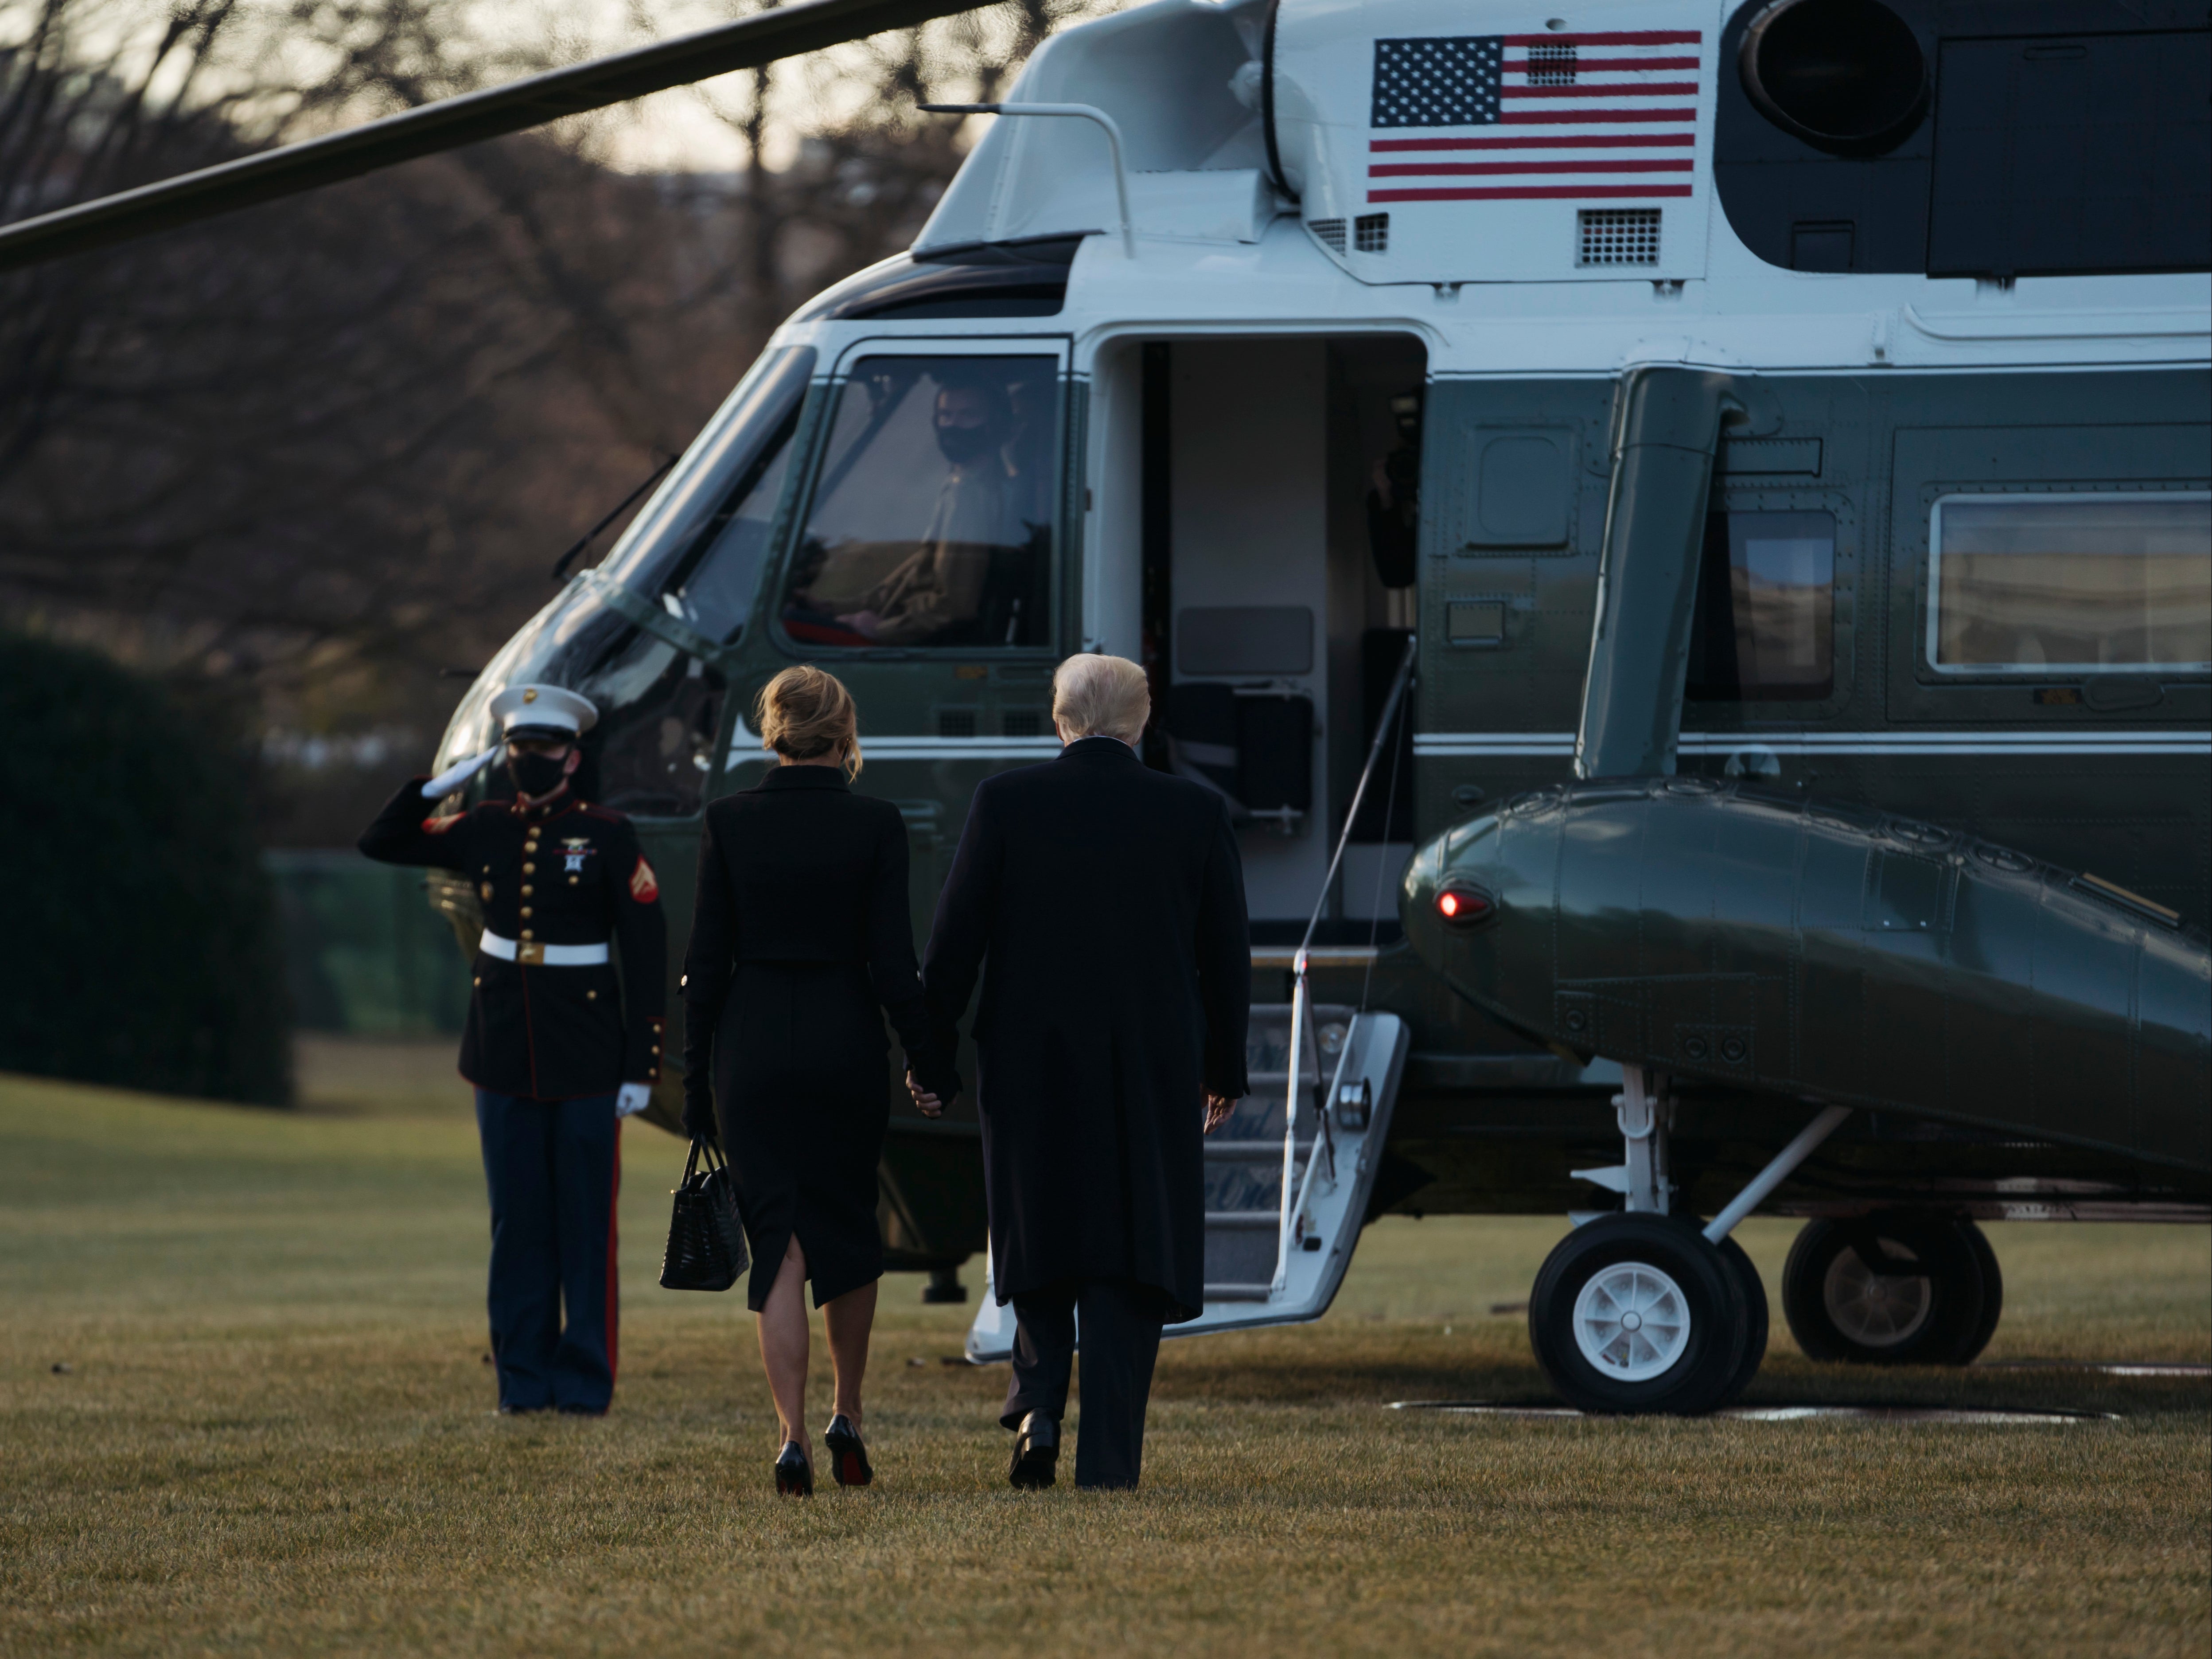 Donald Trump and Melania Trump hold hands as they prepare to depart the White House on Marine One to Florida several hours ahead of the inauguration ceremony. Mr Trump is the first president in more than 150 years to refuse to attend their successor's inauguration